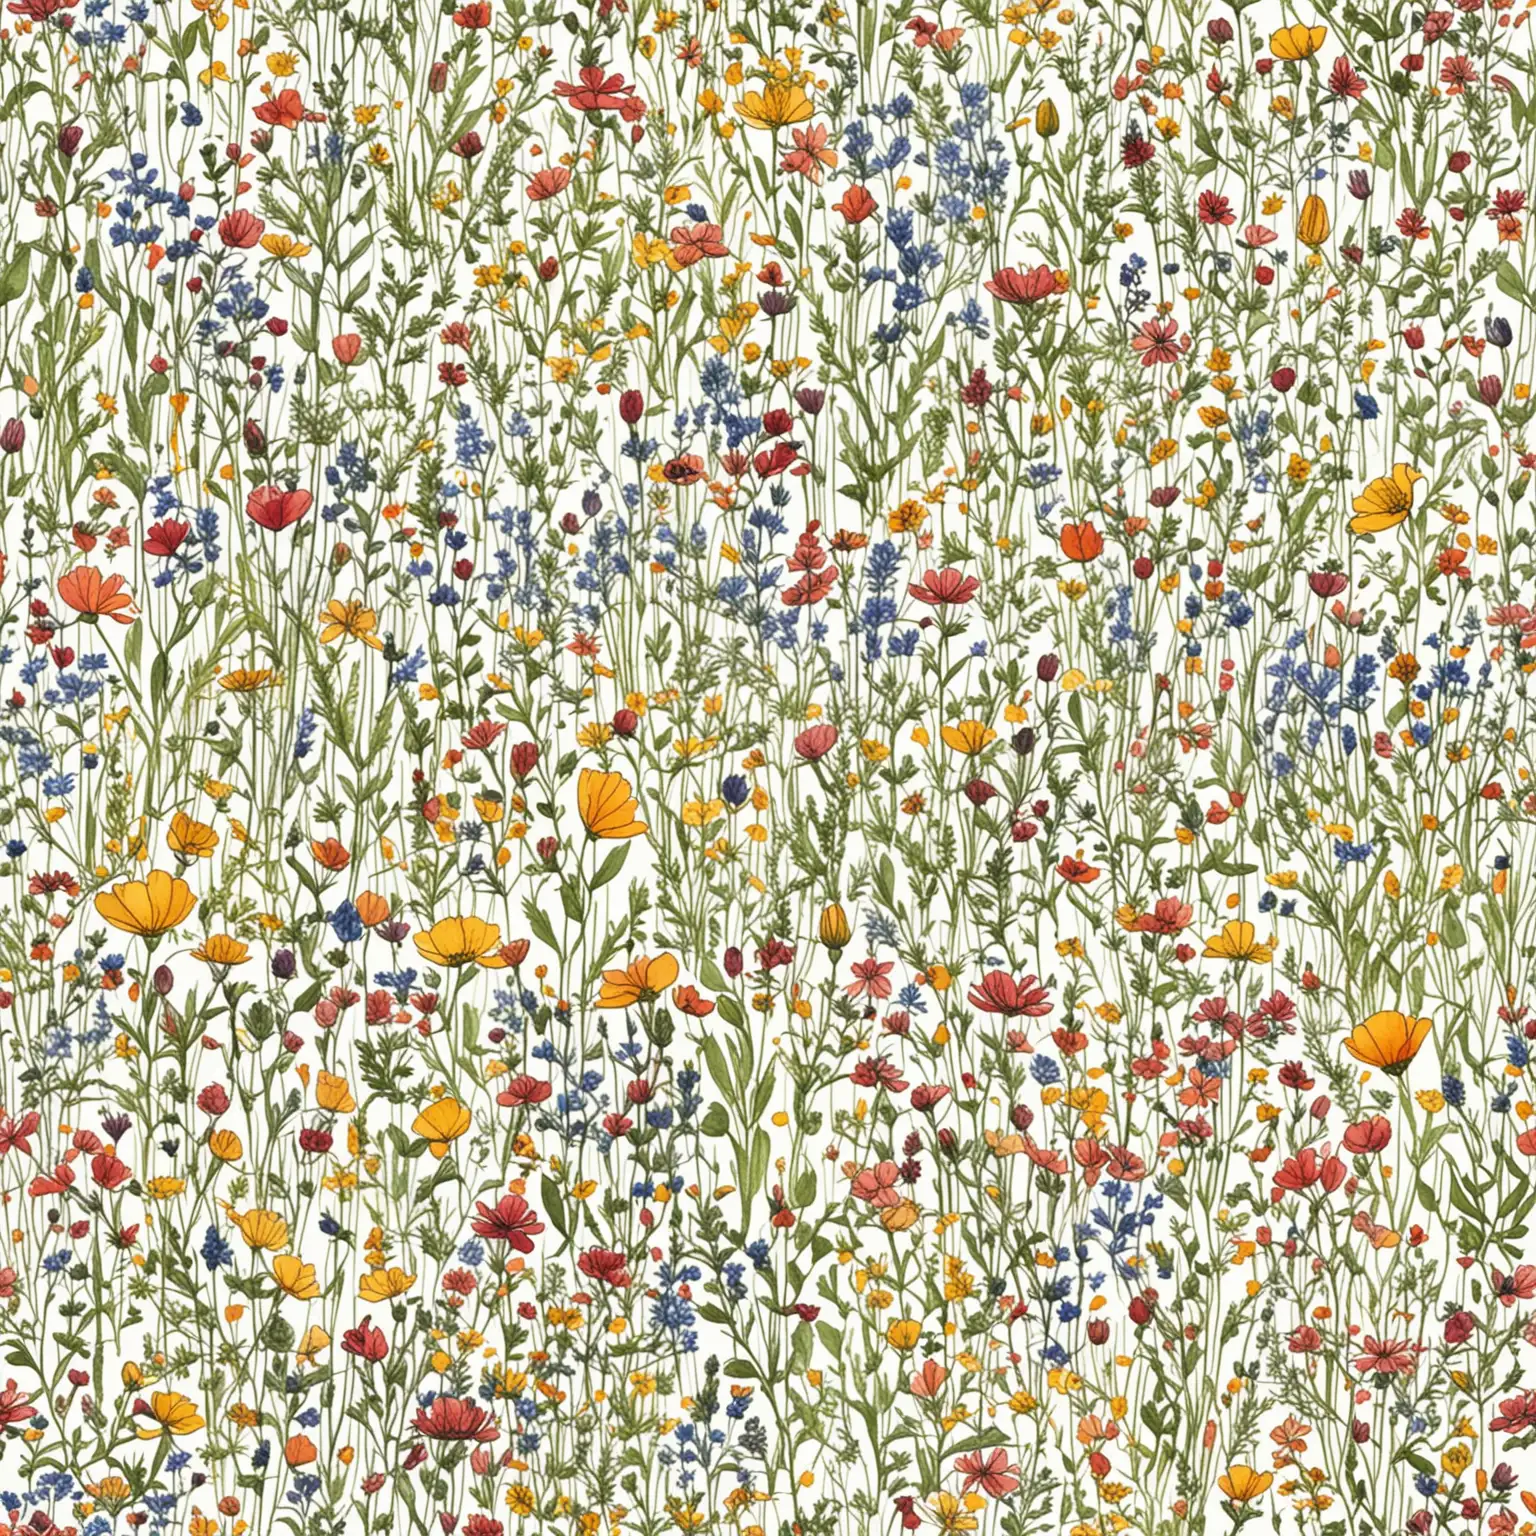 Simple water color and line drawing of a field of wildflowers native to the Northeast US
